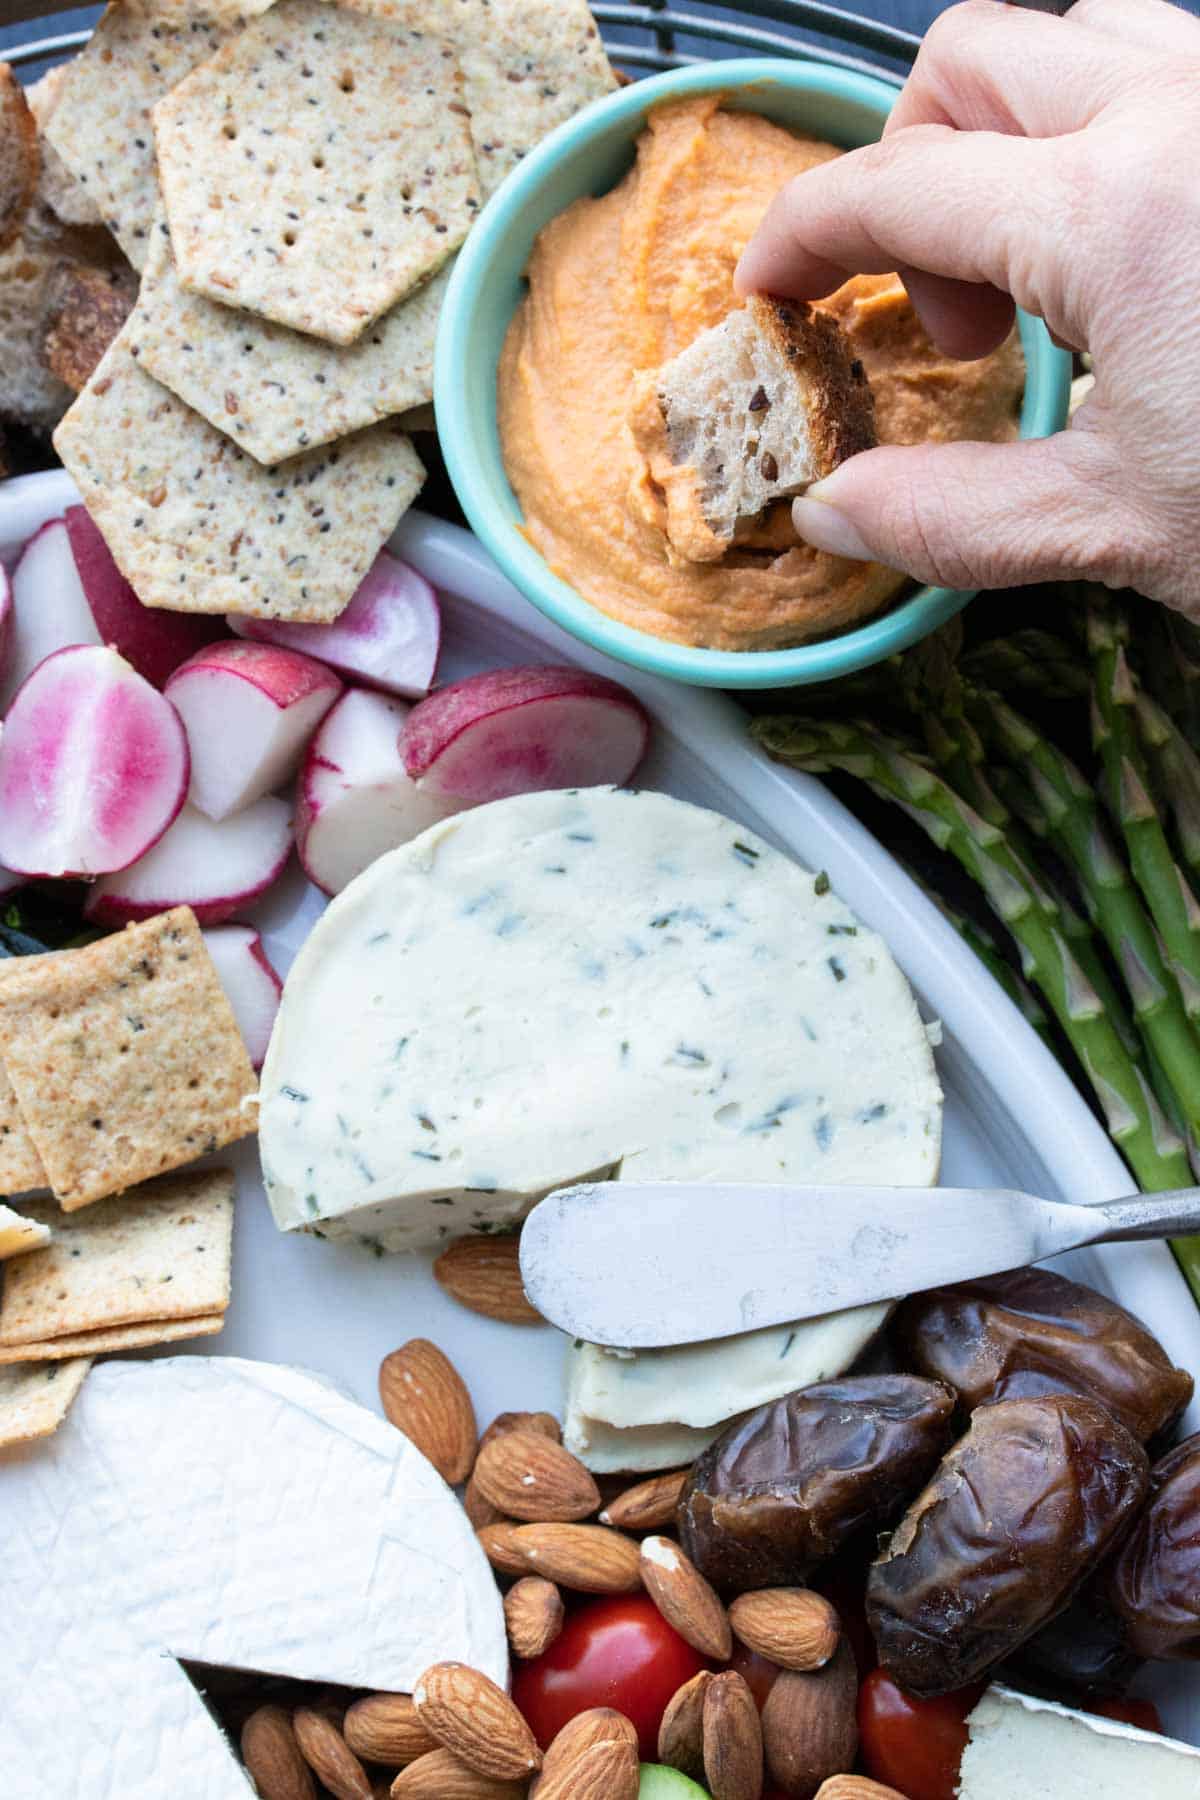 Hand dipping a piece of bread into a red hummus dip next to an appetizer platter.